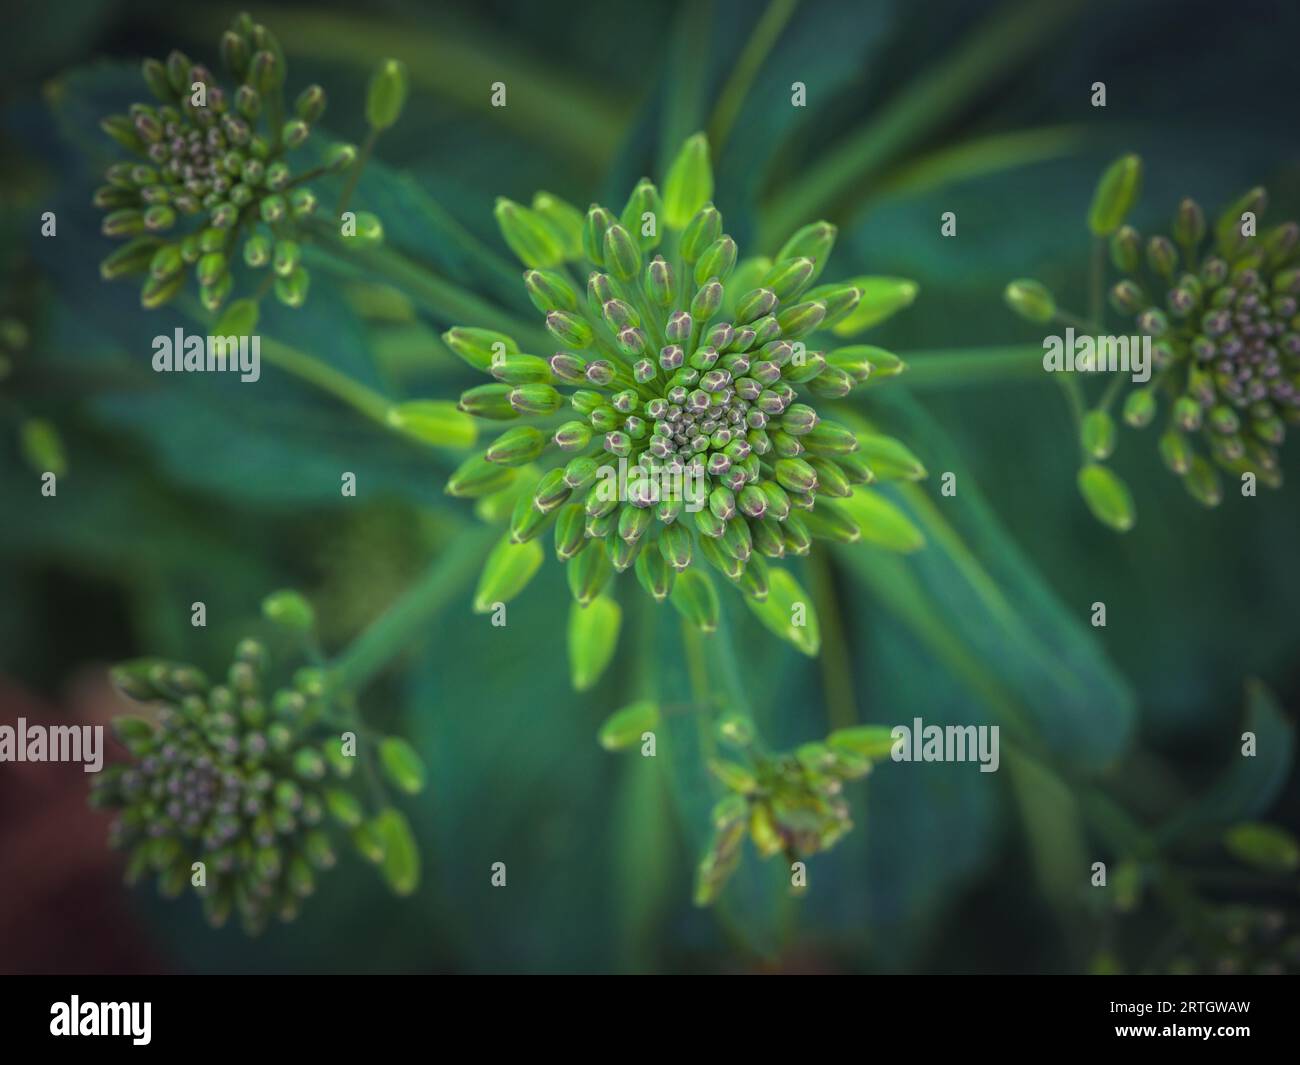 Closeup shot of rapeseed inflorescence of green color with buds vegetating on blurred background Stock Photo